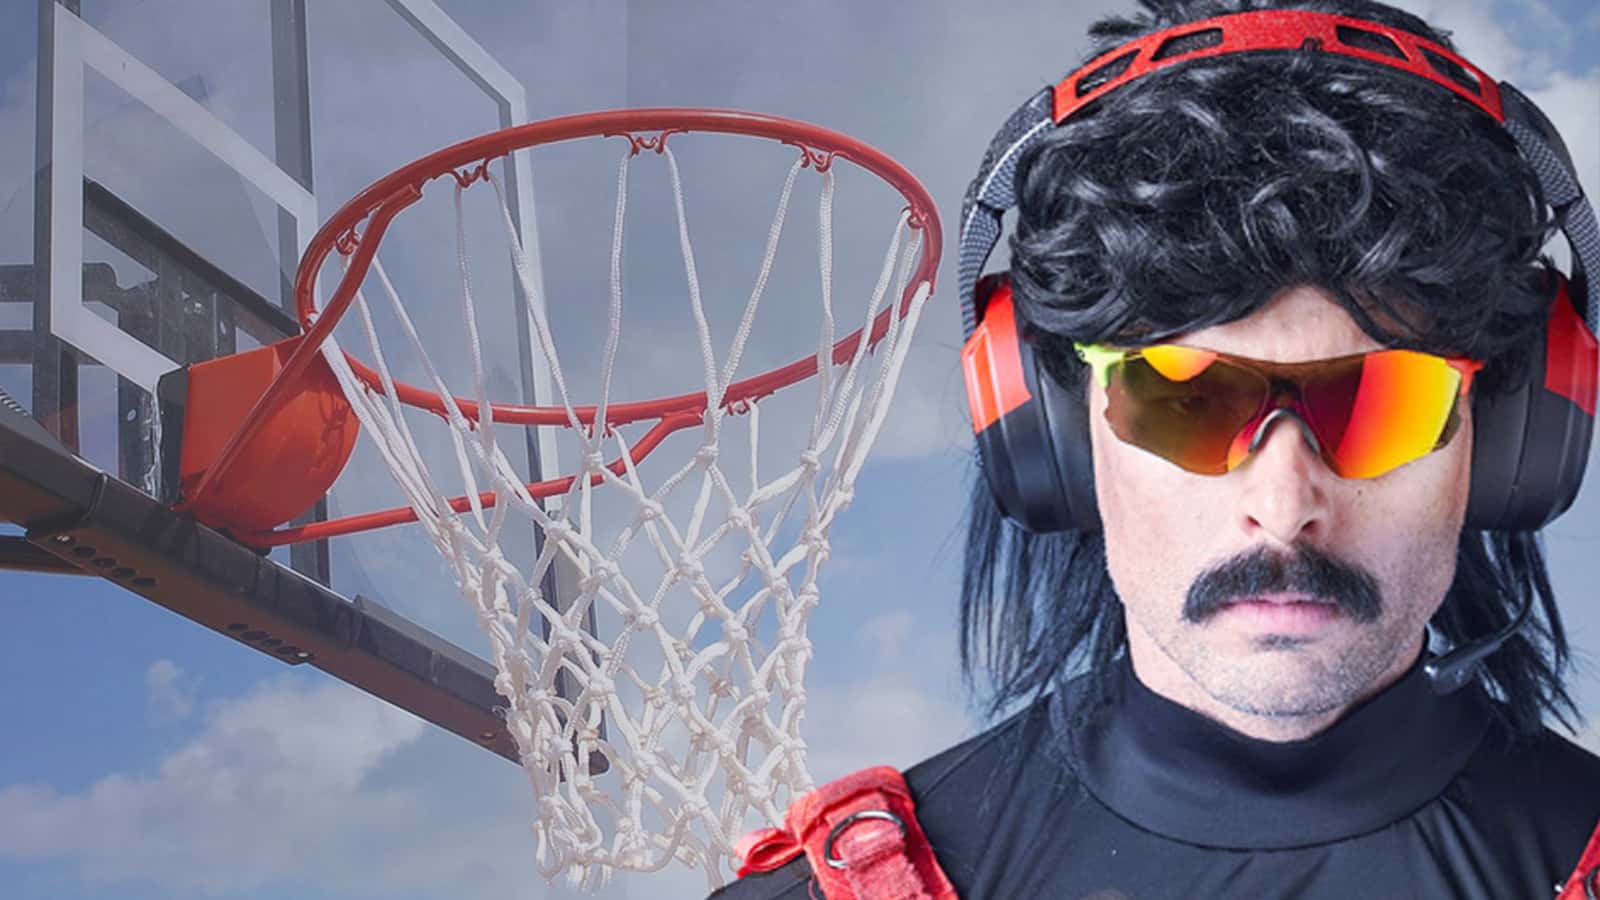 An image of Dr Disrespect